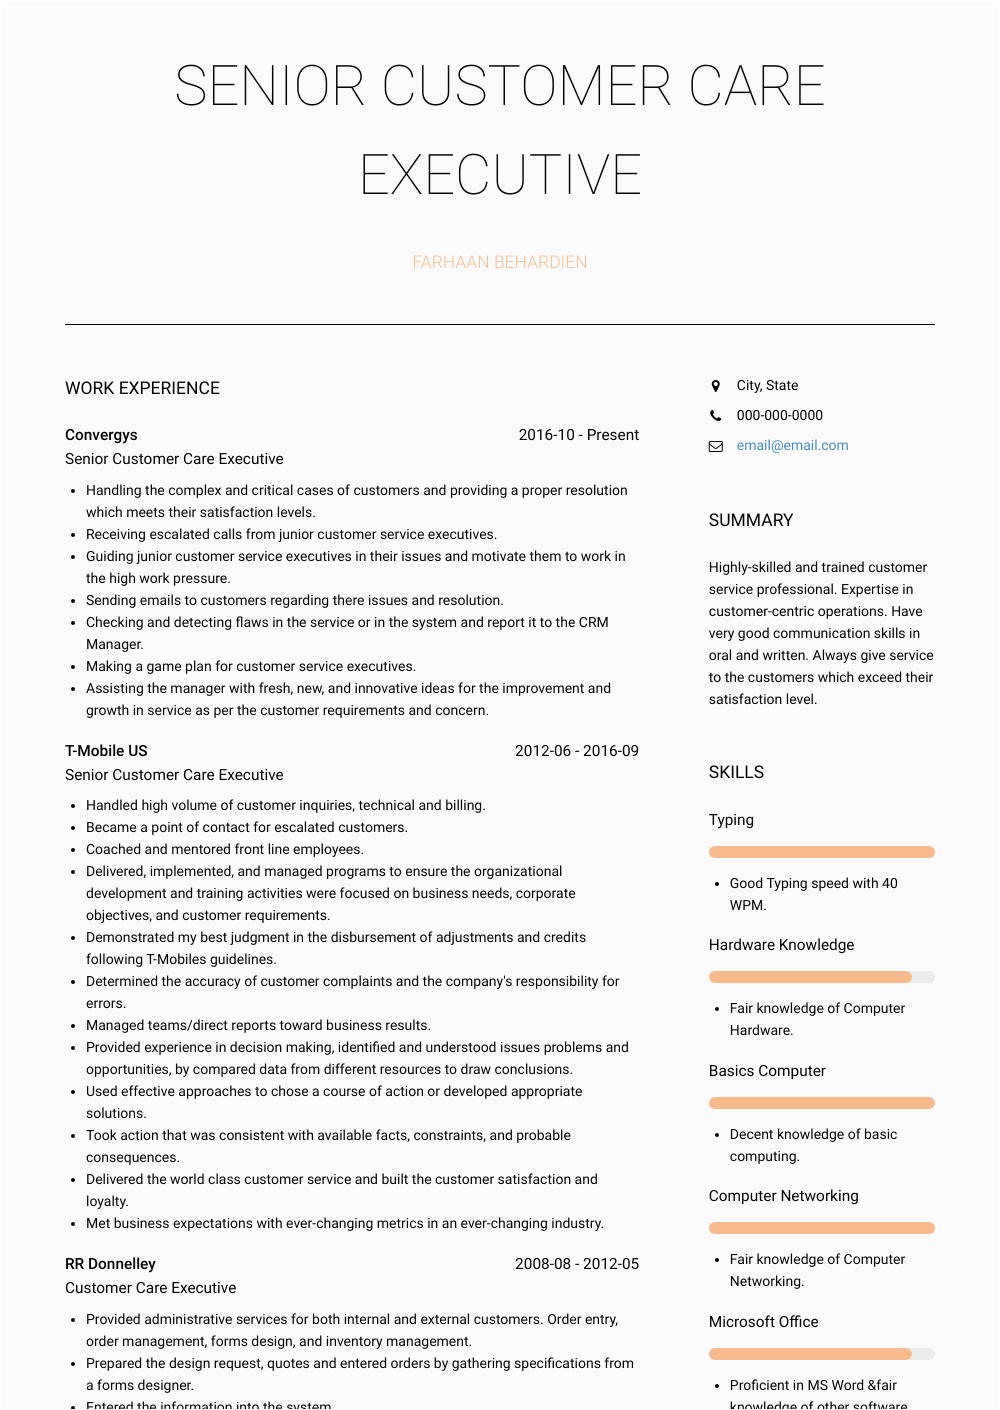 Sample Resume for Customer Care Executive In Bpo Customer Care Executive Resume Samples and Templates